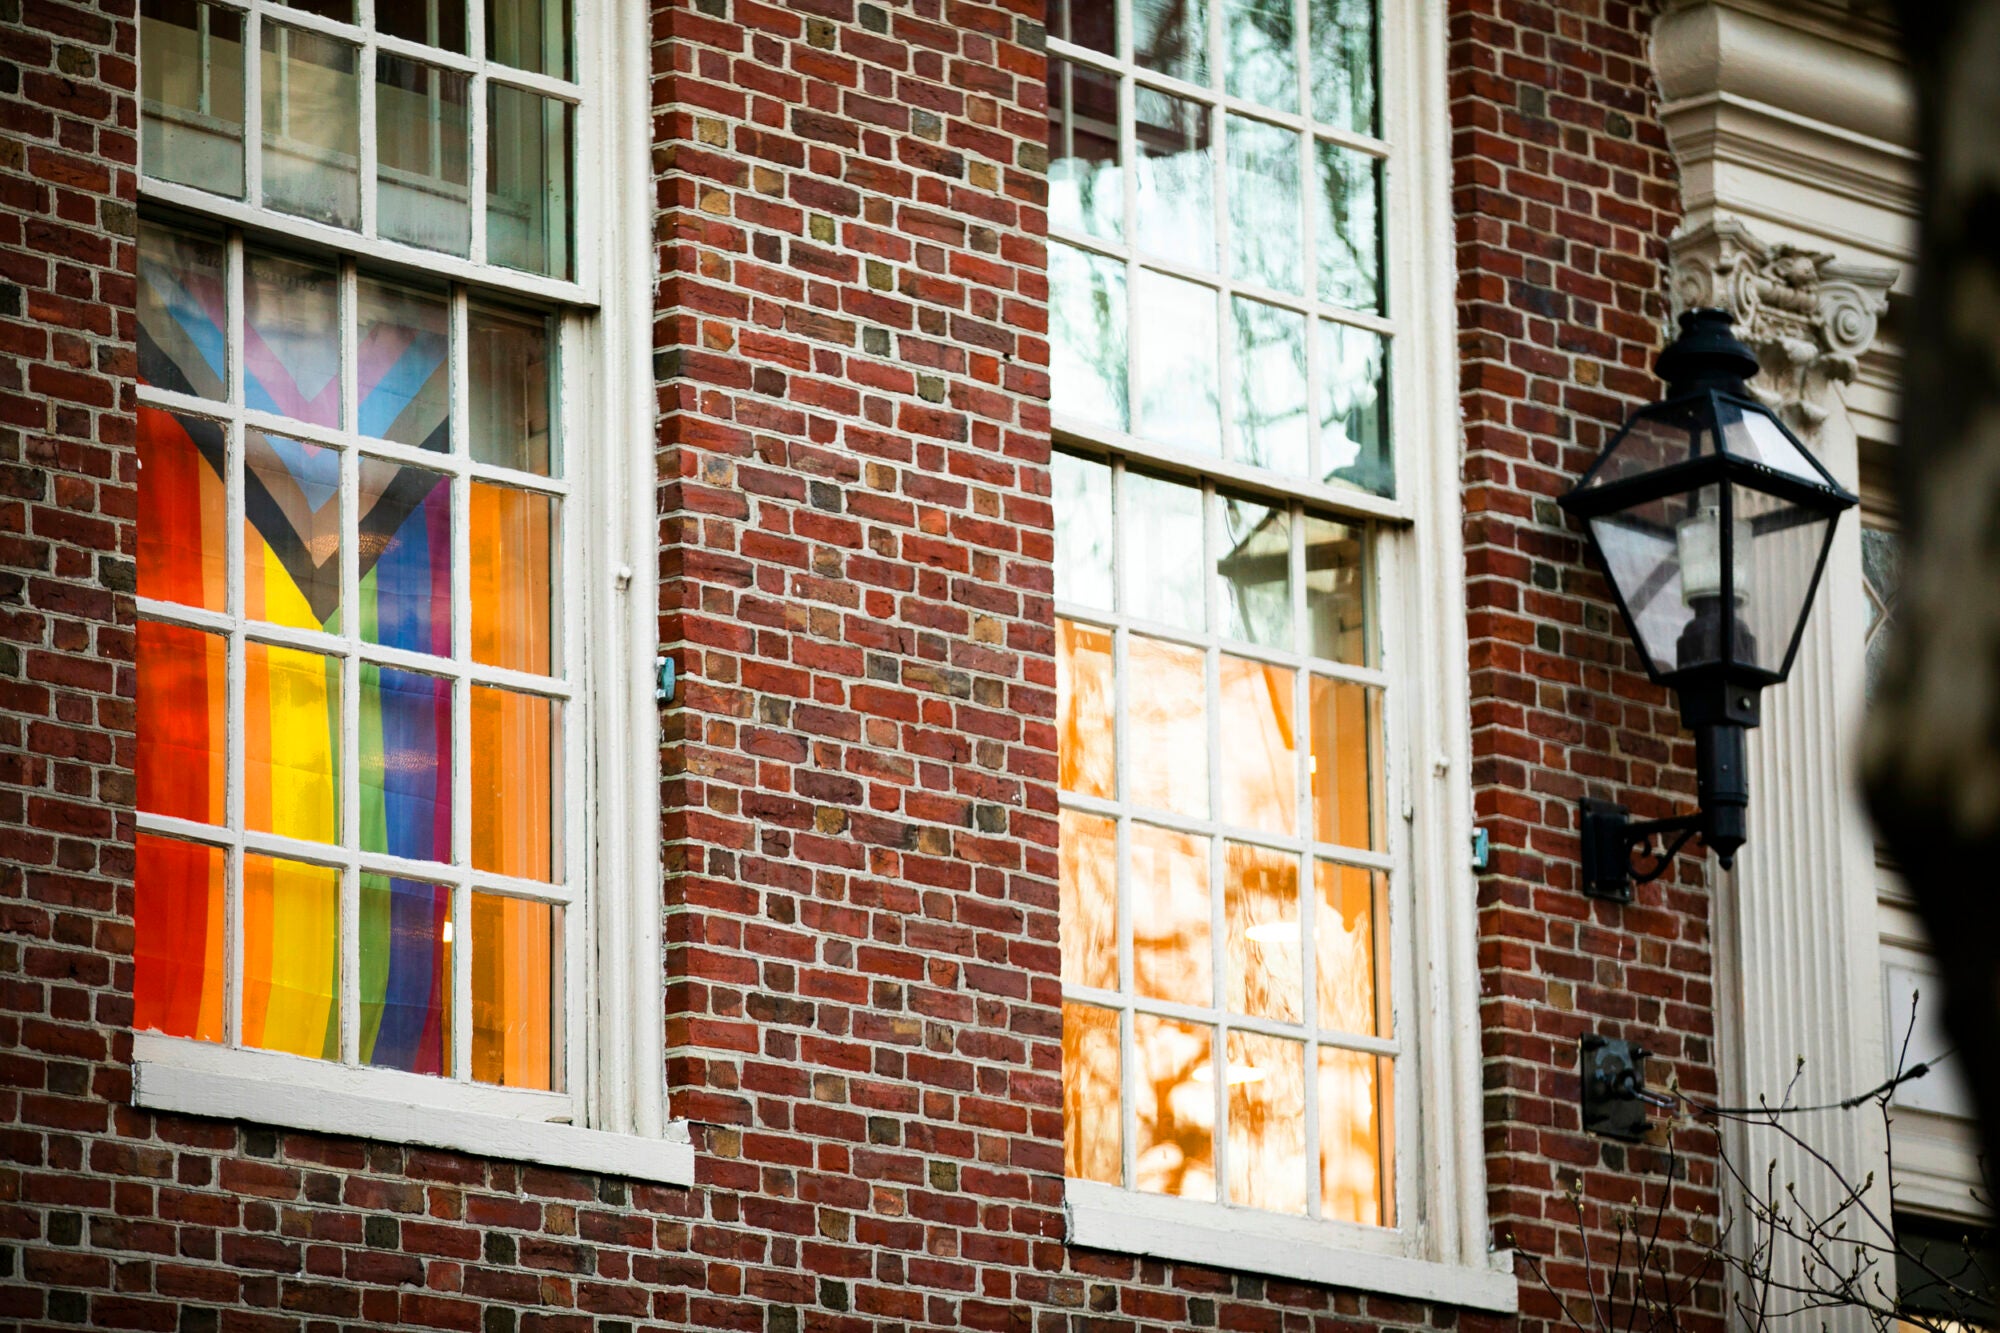 A pride flag hangs in the window of a brick building